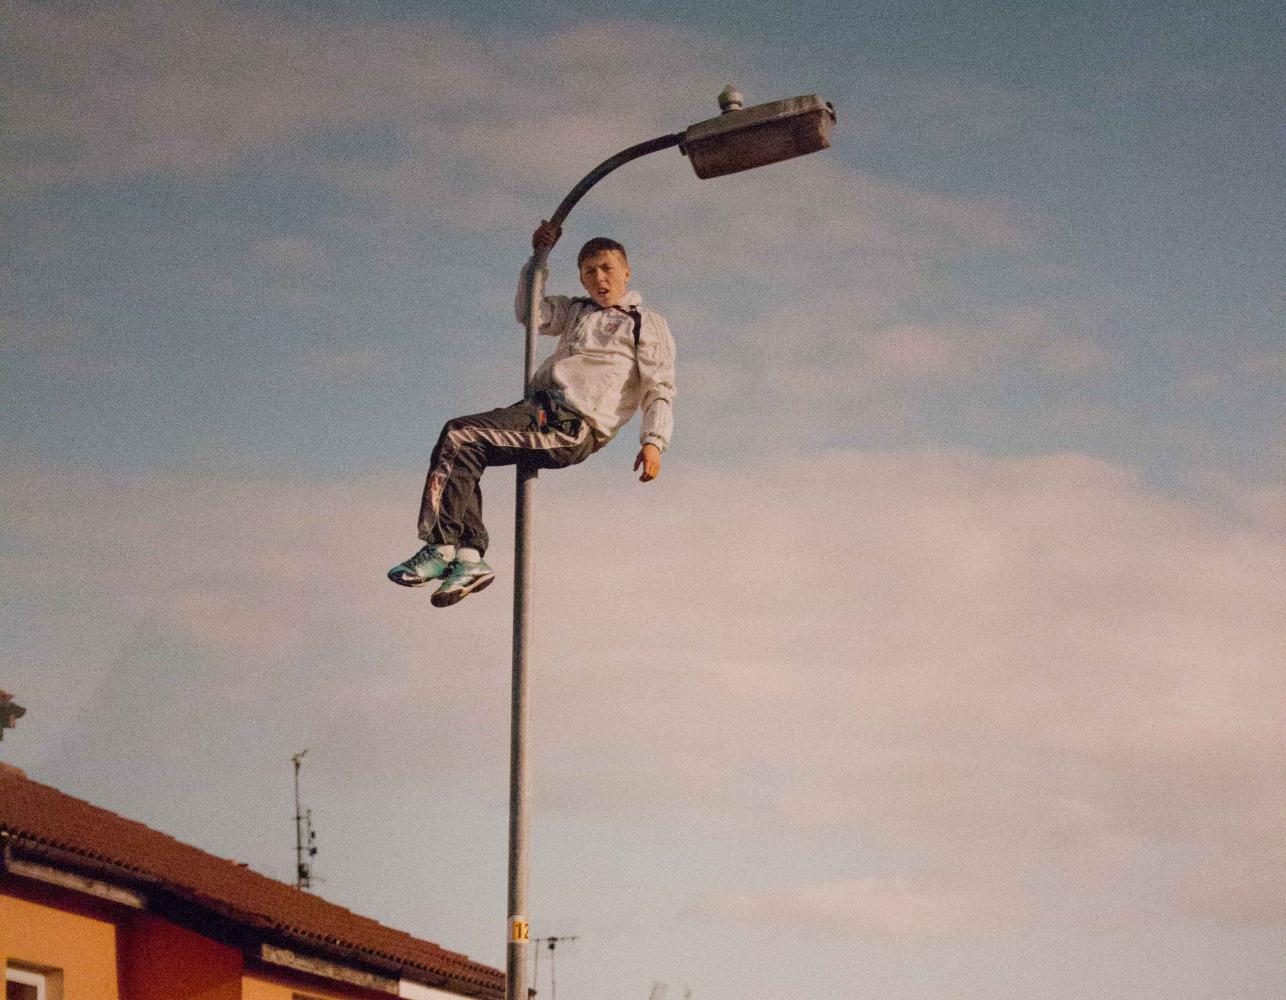 Pictured is Jordan Up The Pole, Russell Heights, Cobh, Ireland. (2010) This is one of many photographs on display in the In Good Time exhibition. 